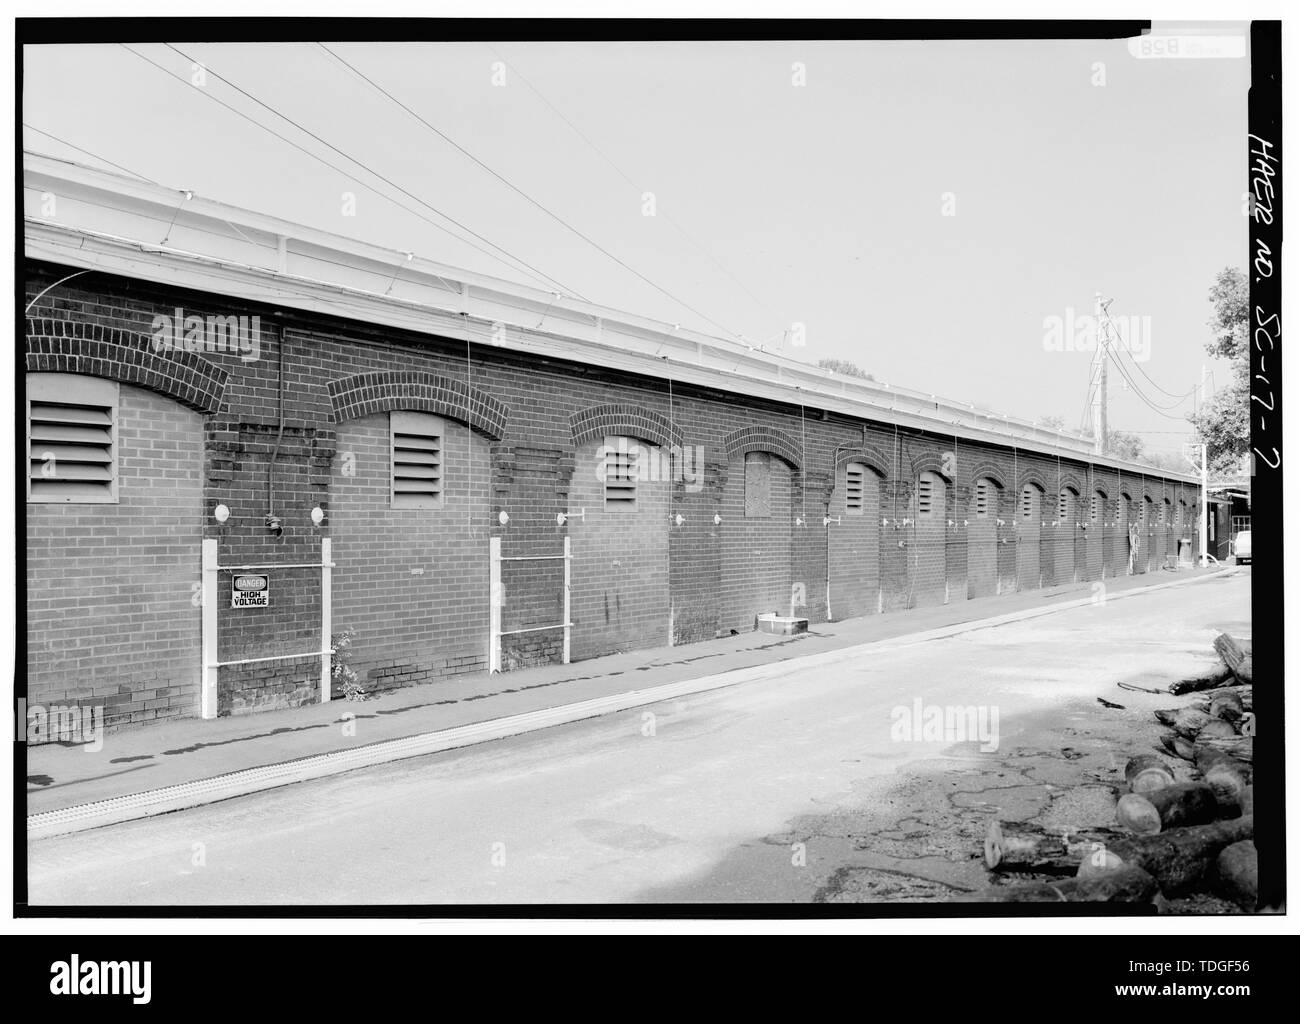 NORTHEAST SIDE ELEVATION, LOOKING NORTHWEST - Columbia Canal and Power Plant, Waterfront of Broad River, Columbia, Richland County, SC; Columbia Water Power Company; South Carolina Electric and Gas Company; Southern Railway; Cary, Brian, transmitter Stock Photo